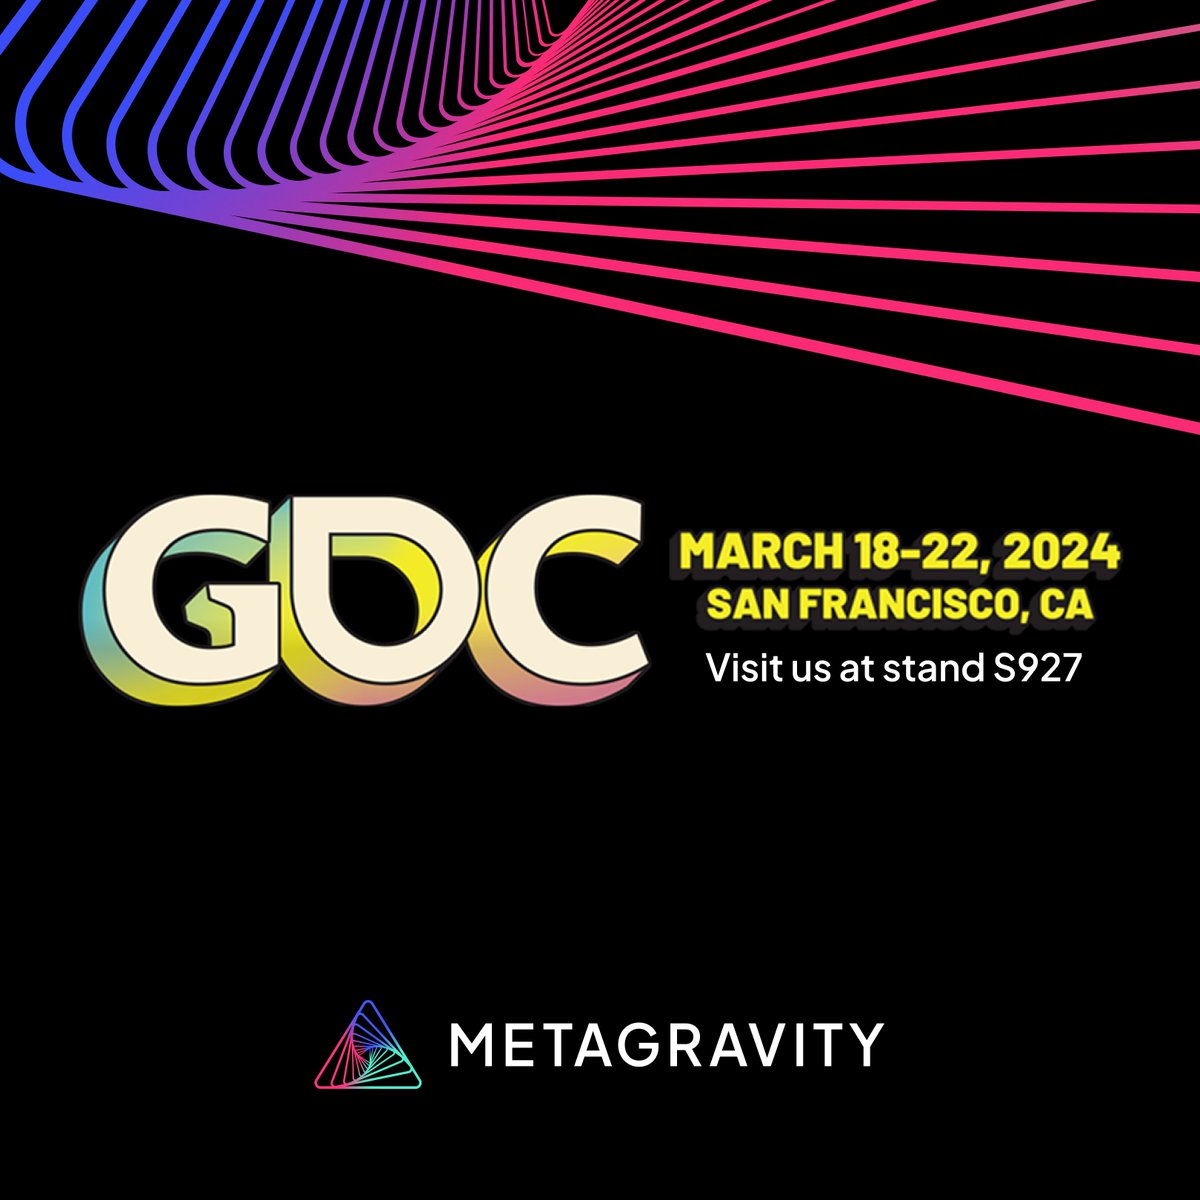 MetaGravity is gearing up for @official_GDC (Game Developers Conference), the top event in the video game industry. Visit booth S927 to see our HyperScale Engine launch, exciting partnerships, and talks with industry leaders. More announcements on #GDC activities coming soon!